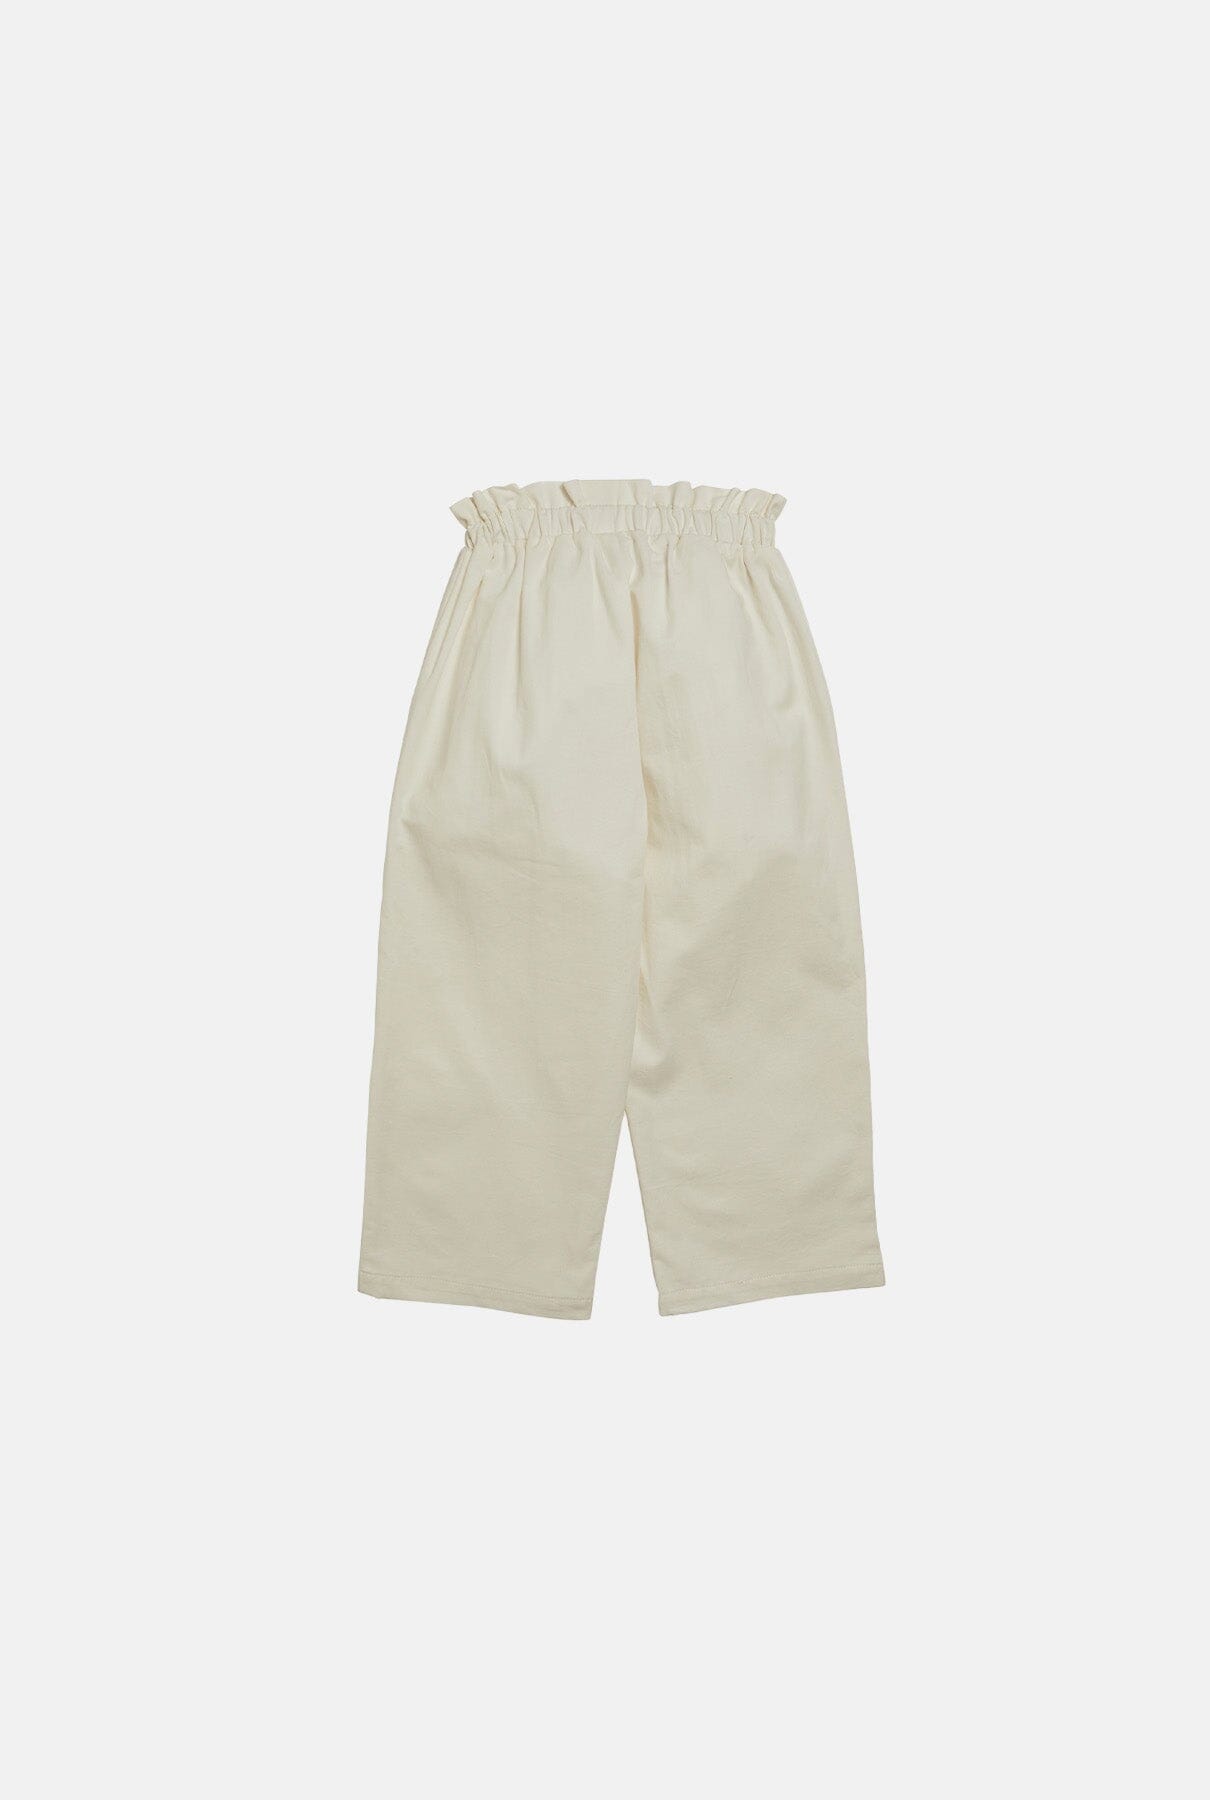 Pippa Trousers Off White Kids Clothing Amaia London 